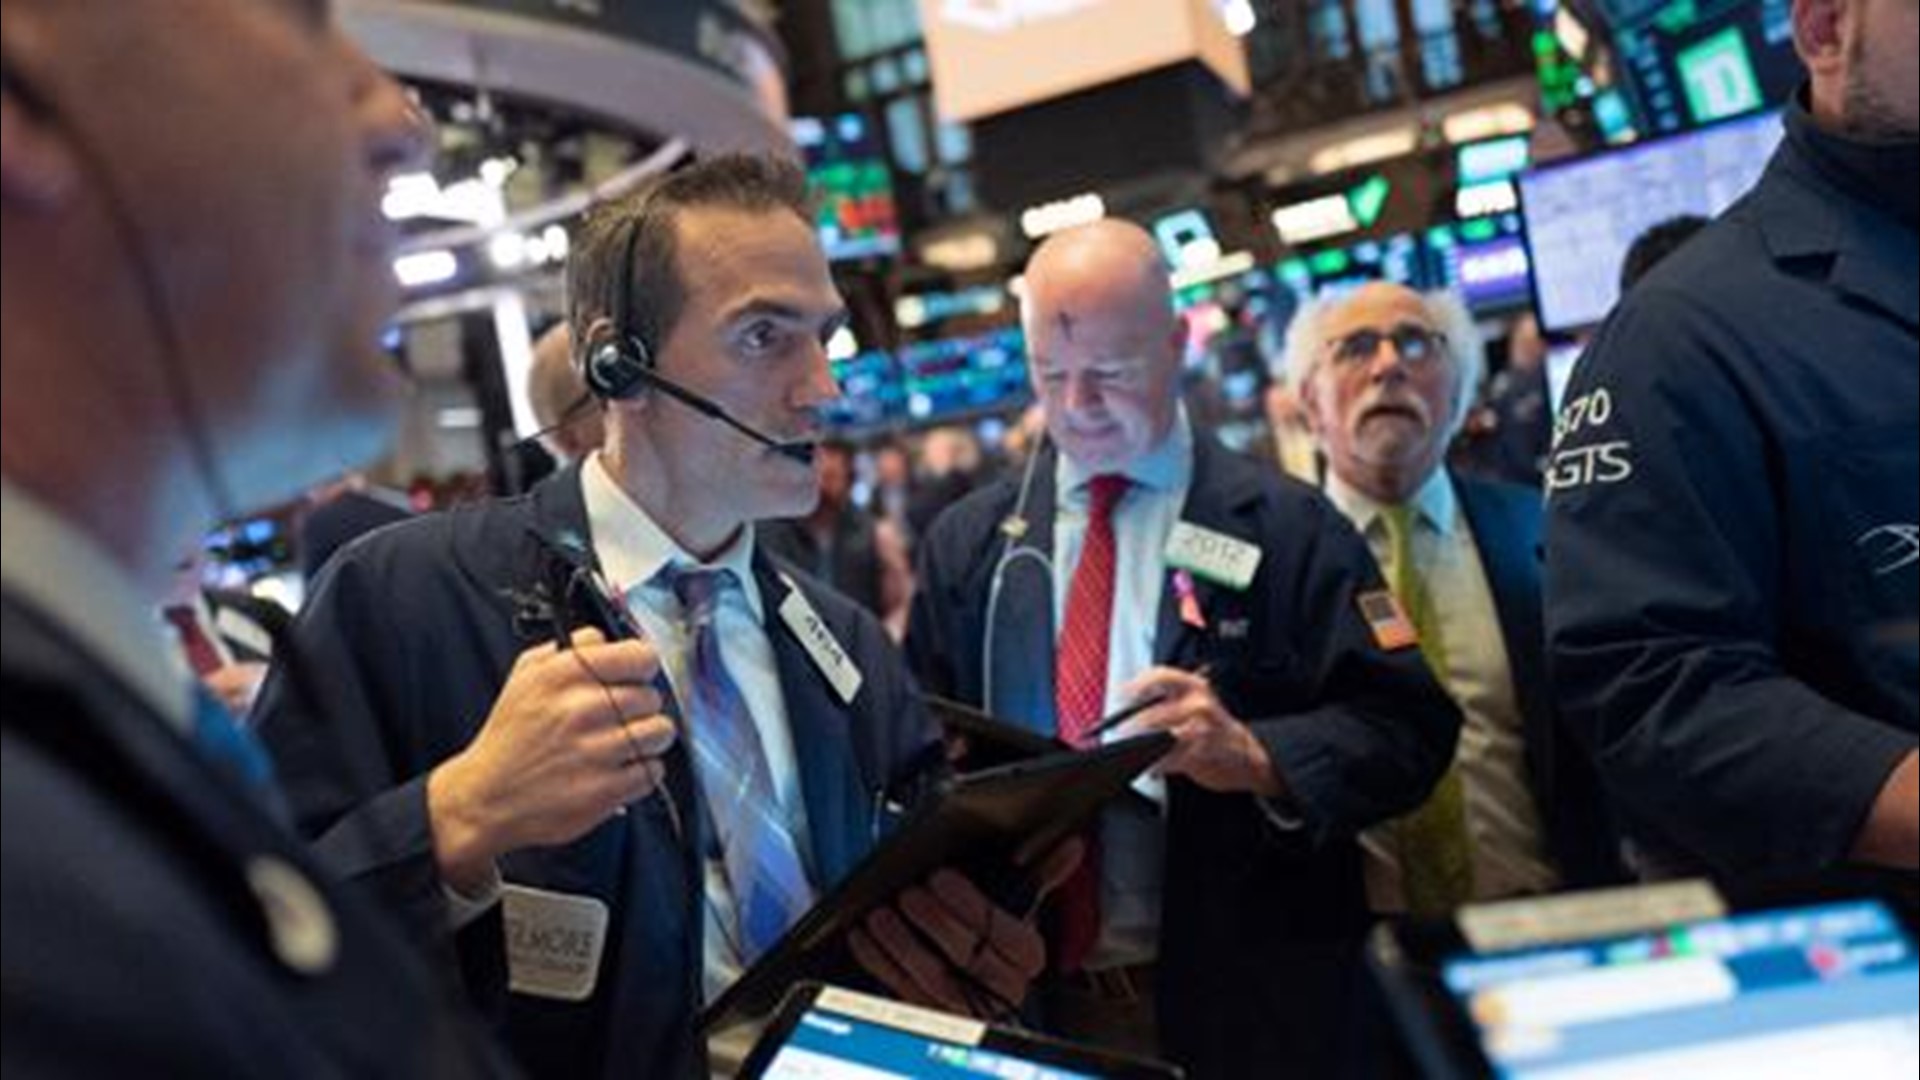 U.S. stocks started in red Monday morning, with the Dow Jones dropping more than 1,000 points. By the end of the day, the Dow closed in green at 99 points higher.